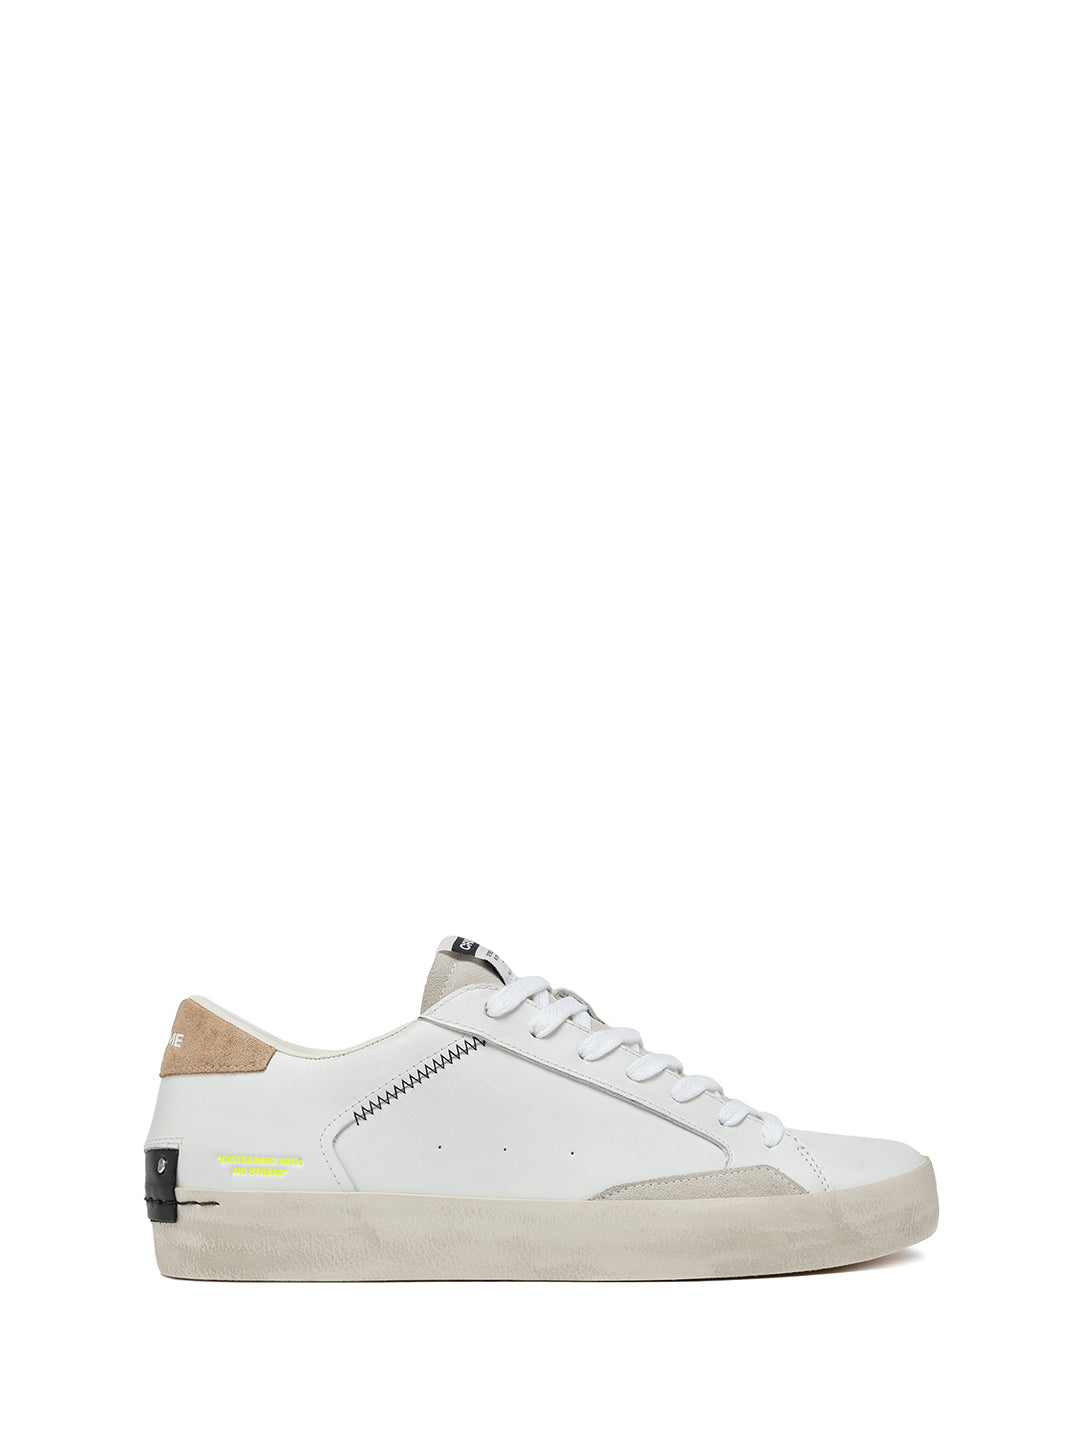 Crime Distressed City Lights sneakers bianco con tab beige